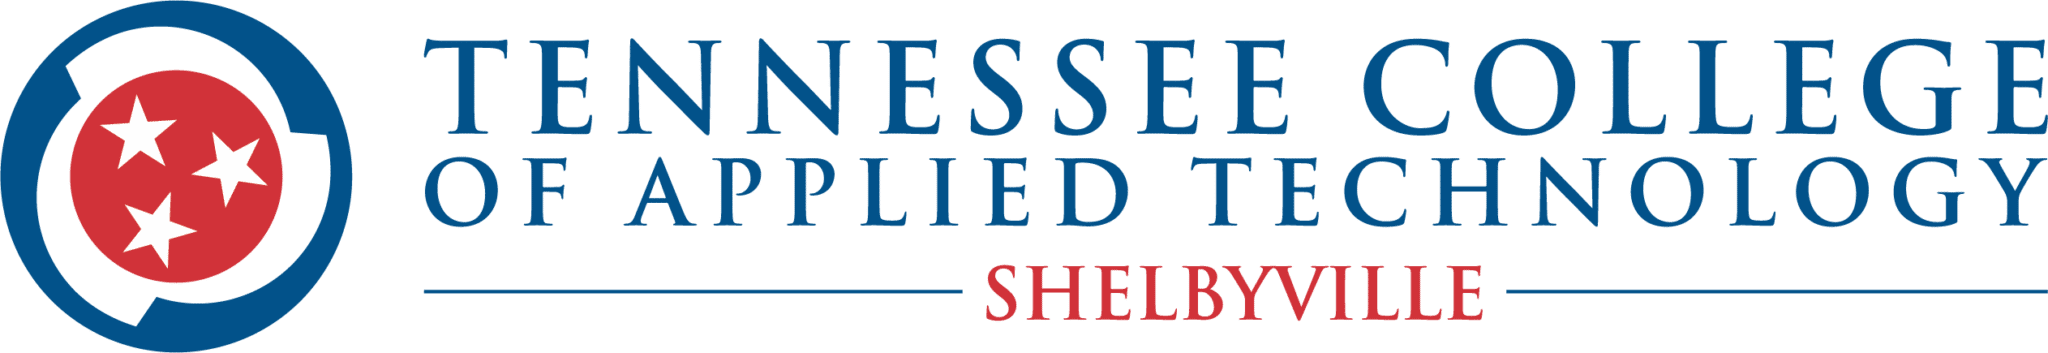 Tennessee College of Applied Technology  –  Shelbyville